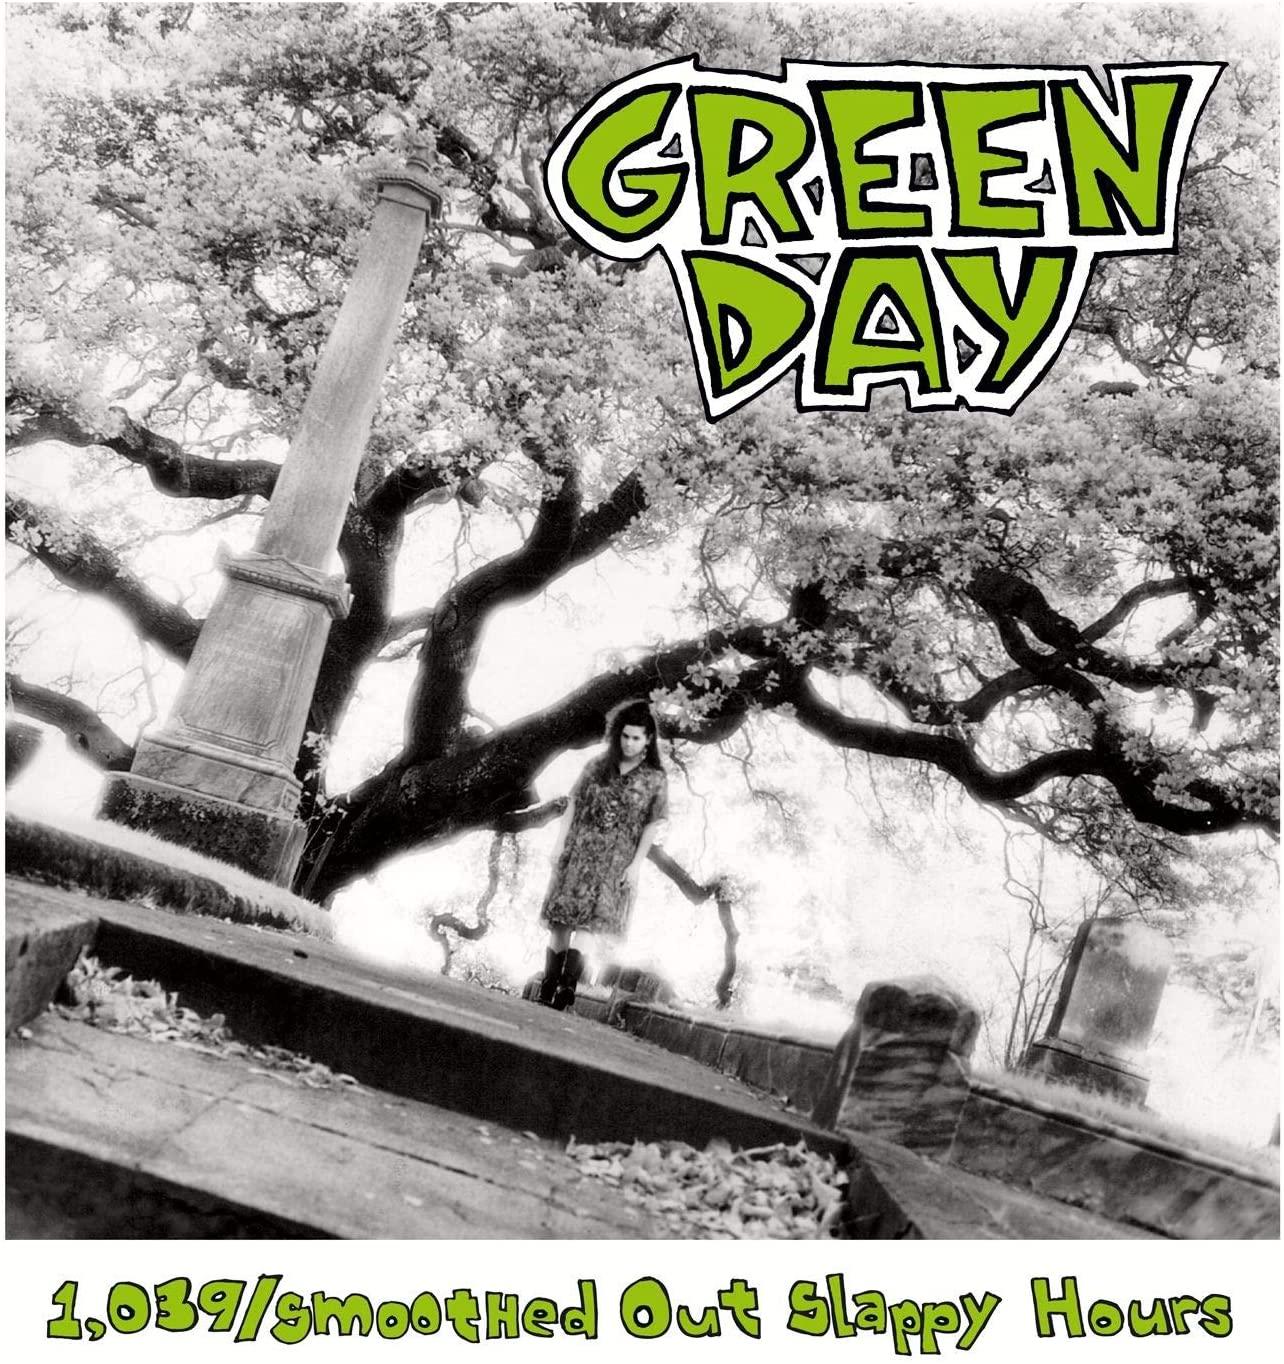 Buy – Green Day "1039 / Smoothed Out Slappy Hours" CD – Band & Music Merch – Cold Cuts Merch